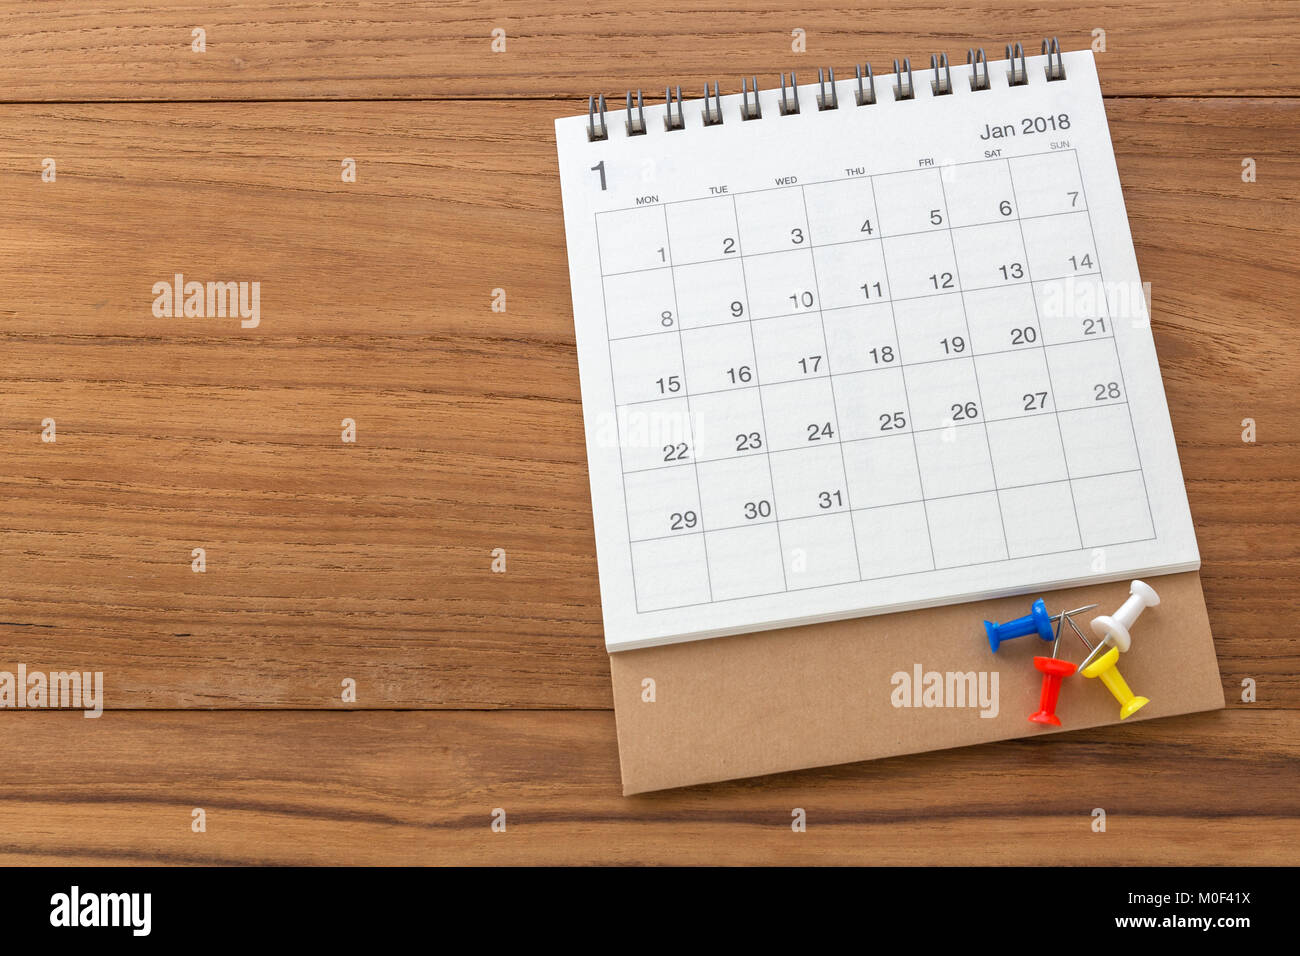 Calendar 2018 on wooden table background Stock Photo